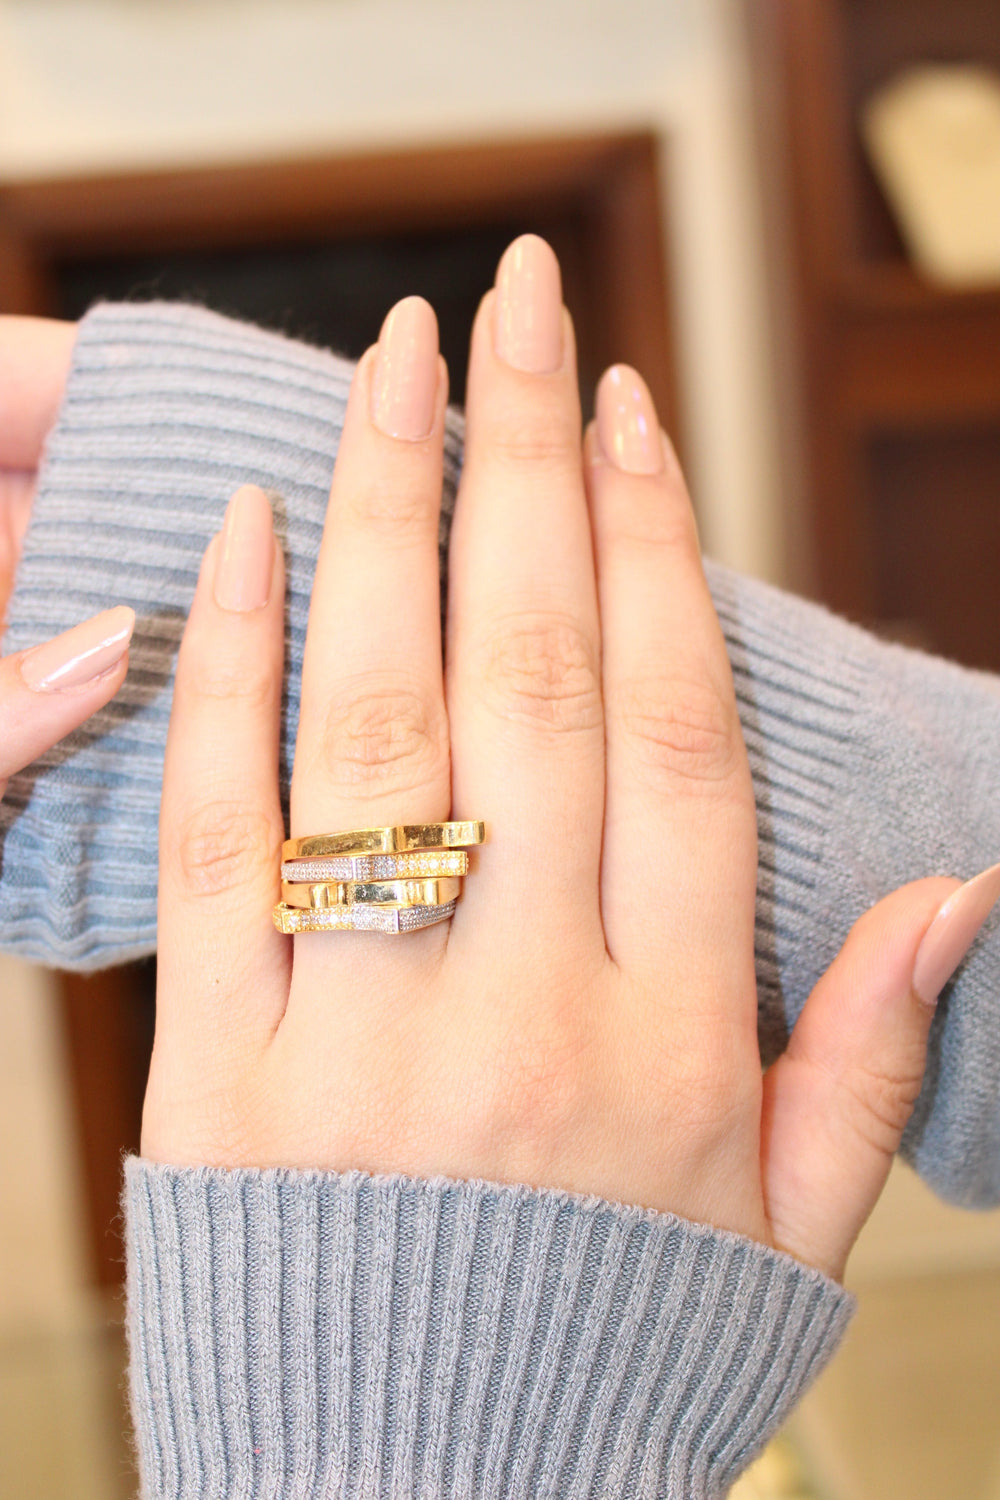 21K Fancy Ring Made of 21K Yellow Gold by Saeed Jewelry-10328